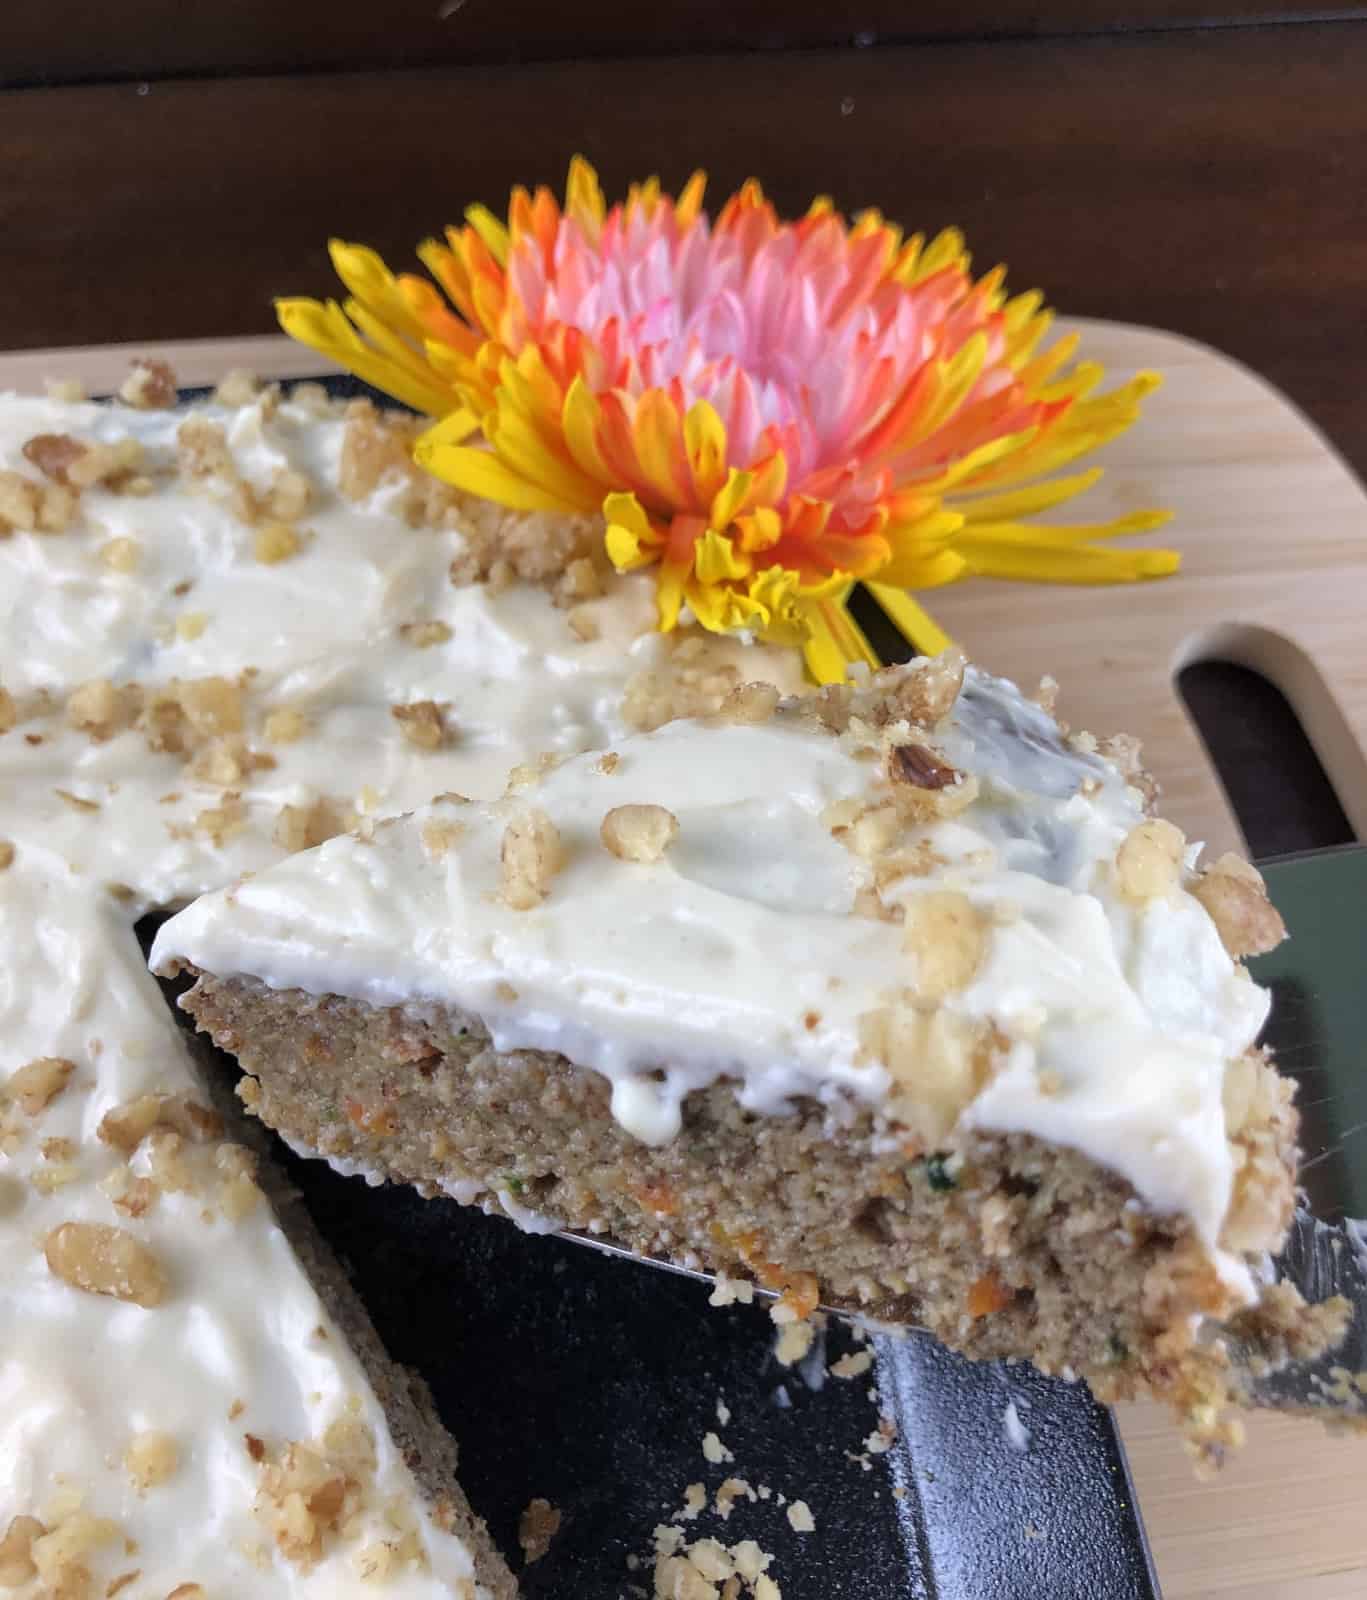 Carrot Cake with Cream Cheese Frosting sprinkled with walnuts on a wooden cutting board with a yellow and pink flower